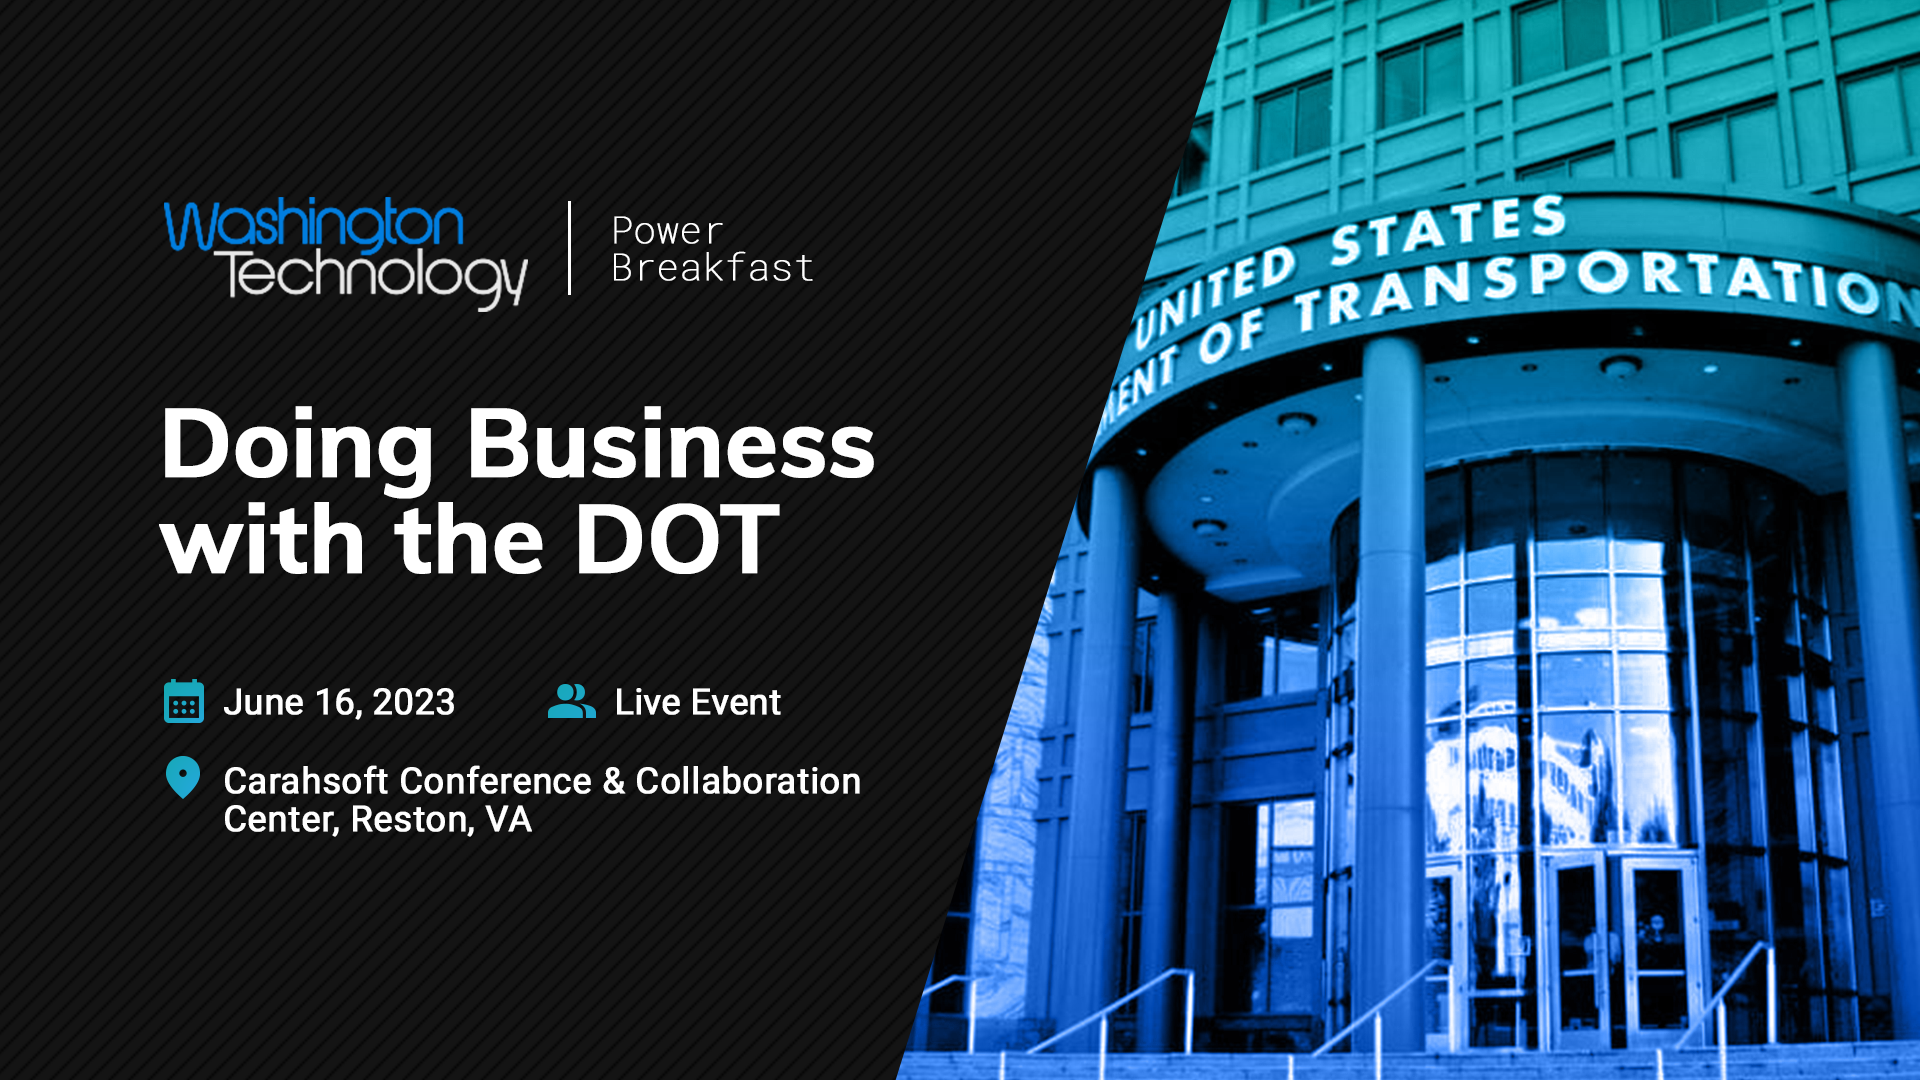 Washington Technology Power Breakfast: Doing Business with the DOT